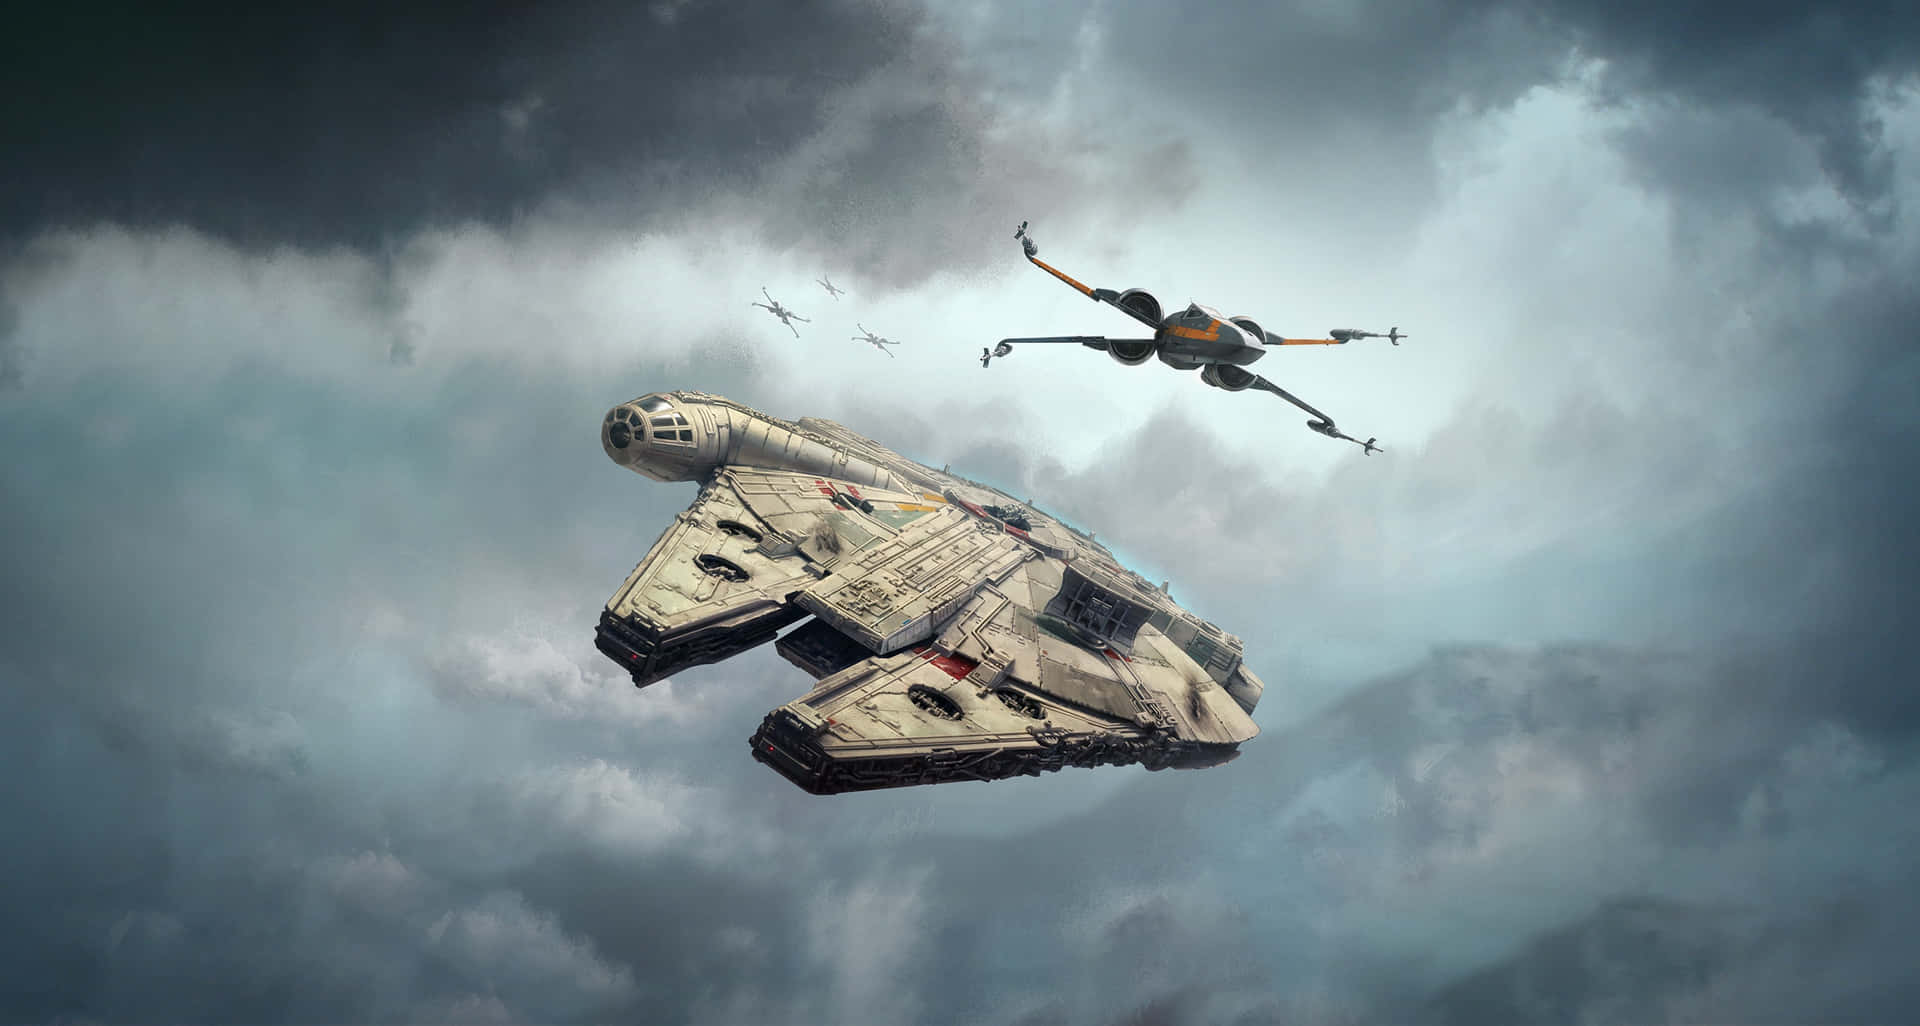 Fly into Galactic Battles with the X-Wing Fighter Wallpaper